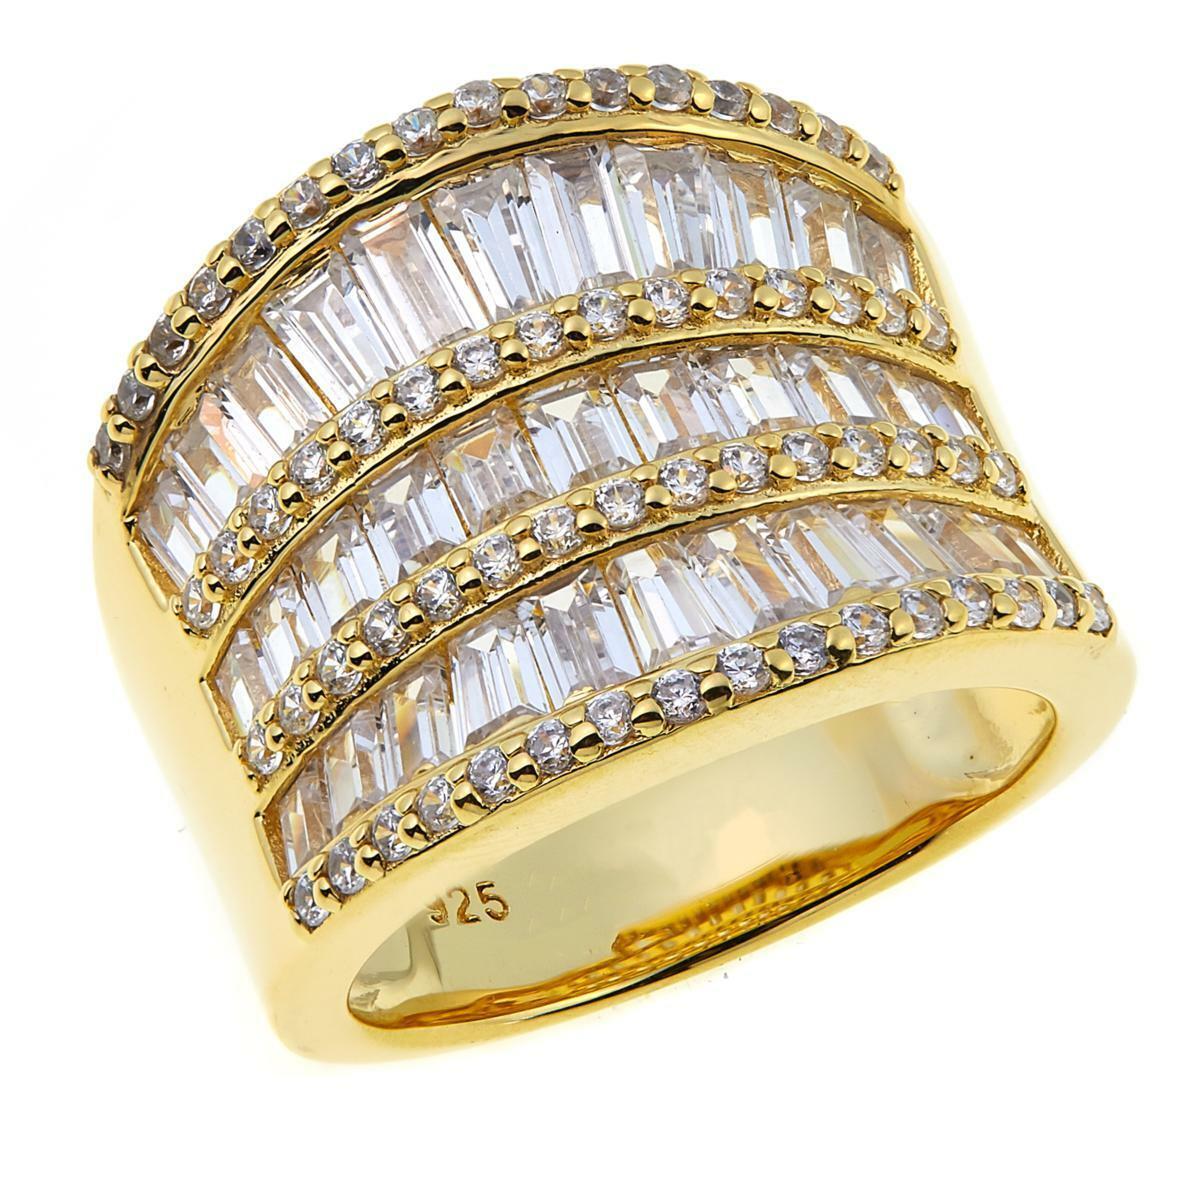 Absolute 3.46Ctw Cz Baguette And Round Multi-Row Saddle Ring Size 7 Goldtone